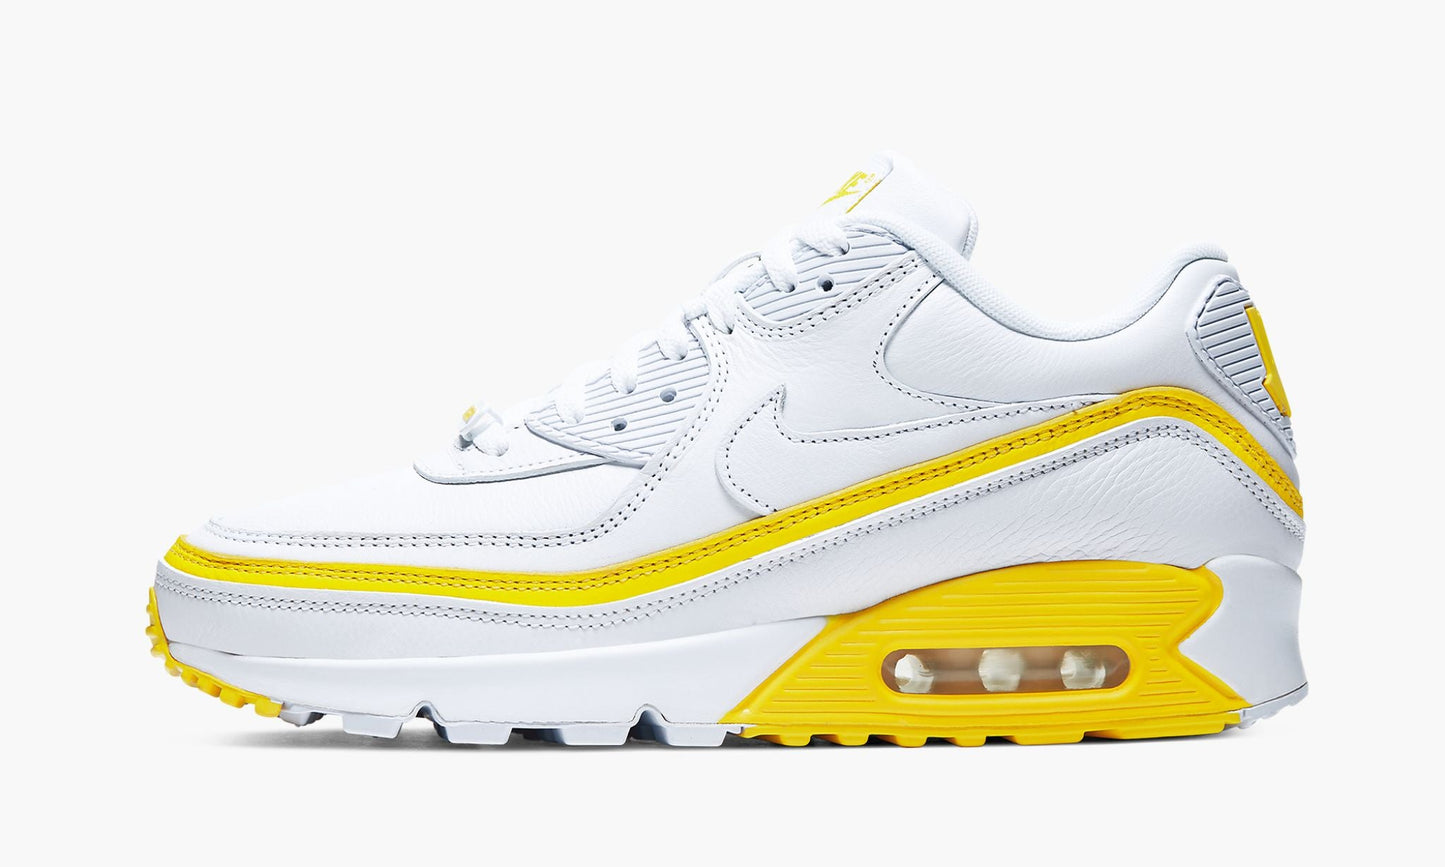 Air Max 90 / UNDFTD "Undefeated - White/Optic Yellow"